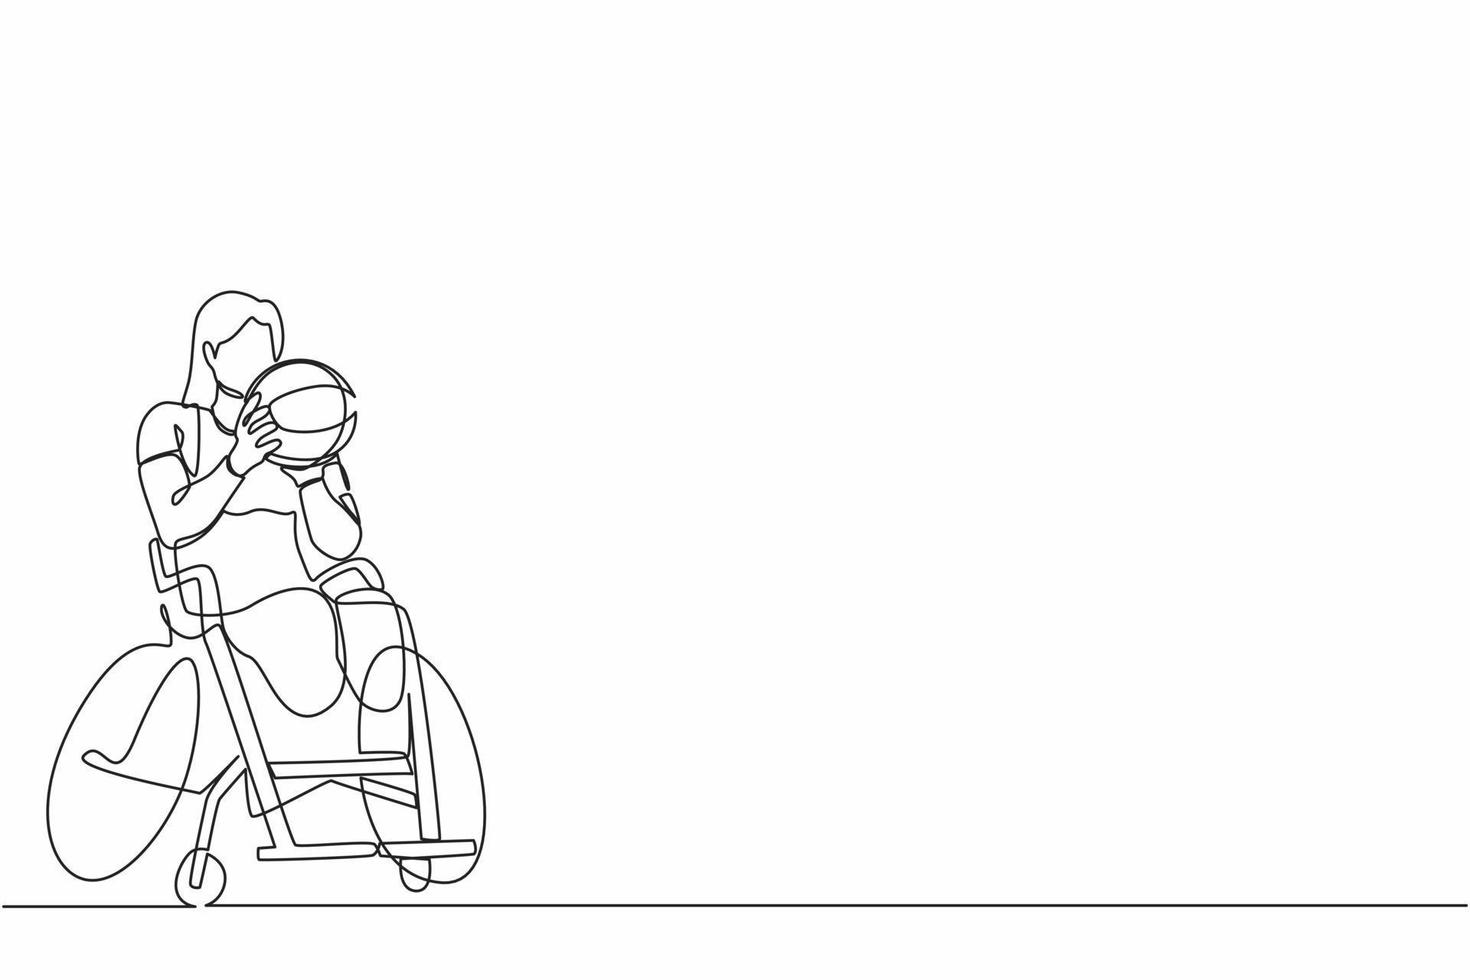 Continuous one line drawing athlete in wheelchair play basketball.  woman training for tournament game, sport for invalid person. Accessibility and diversity. Single line graphic design vector